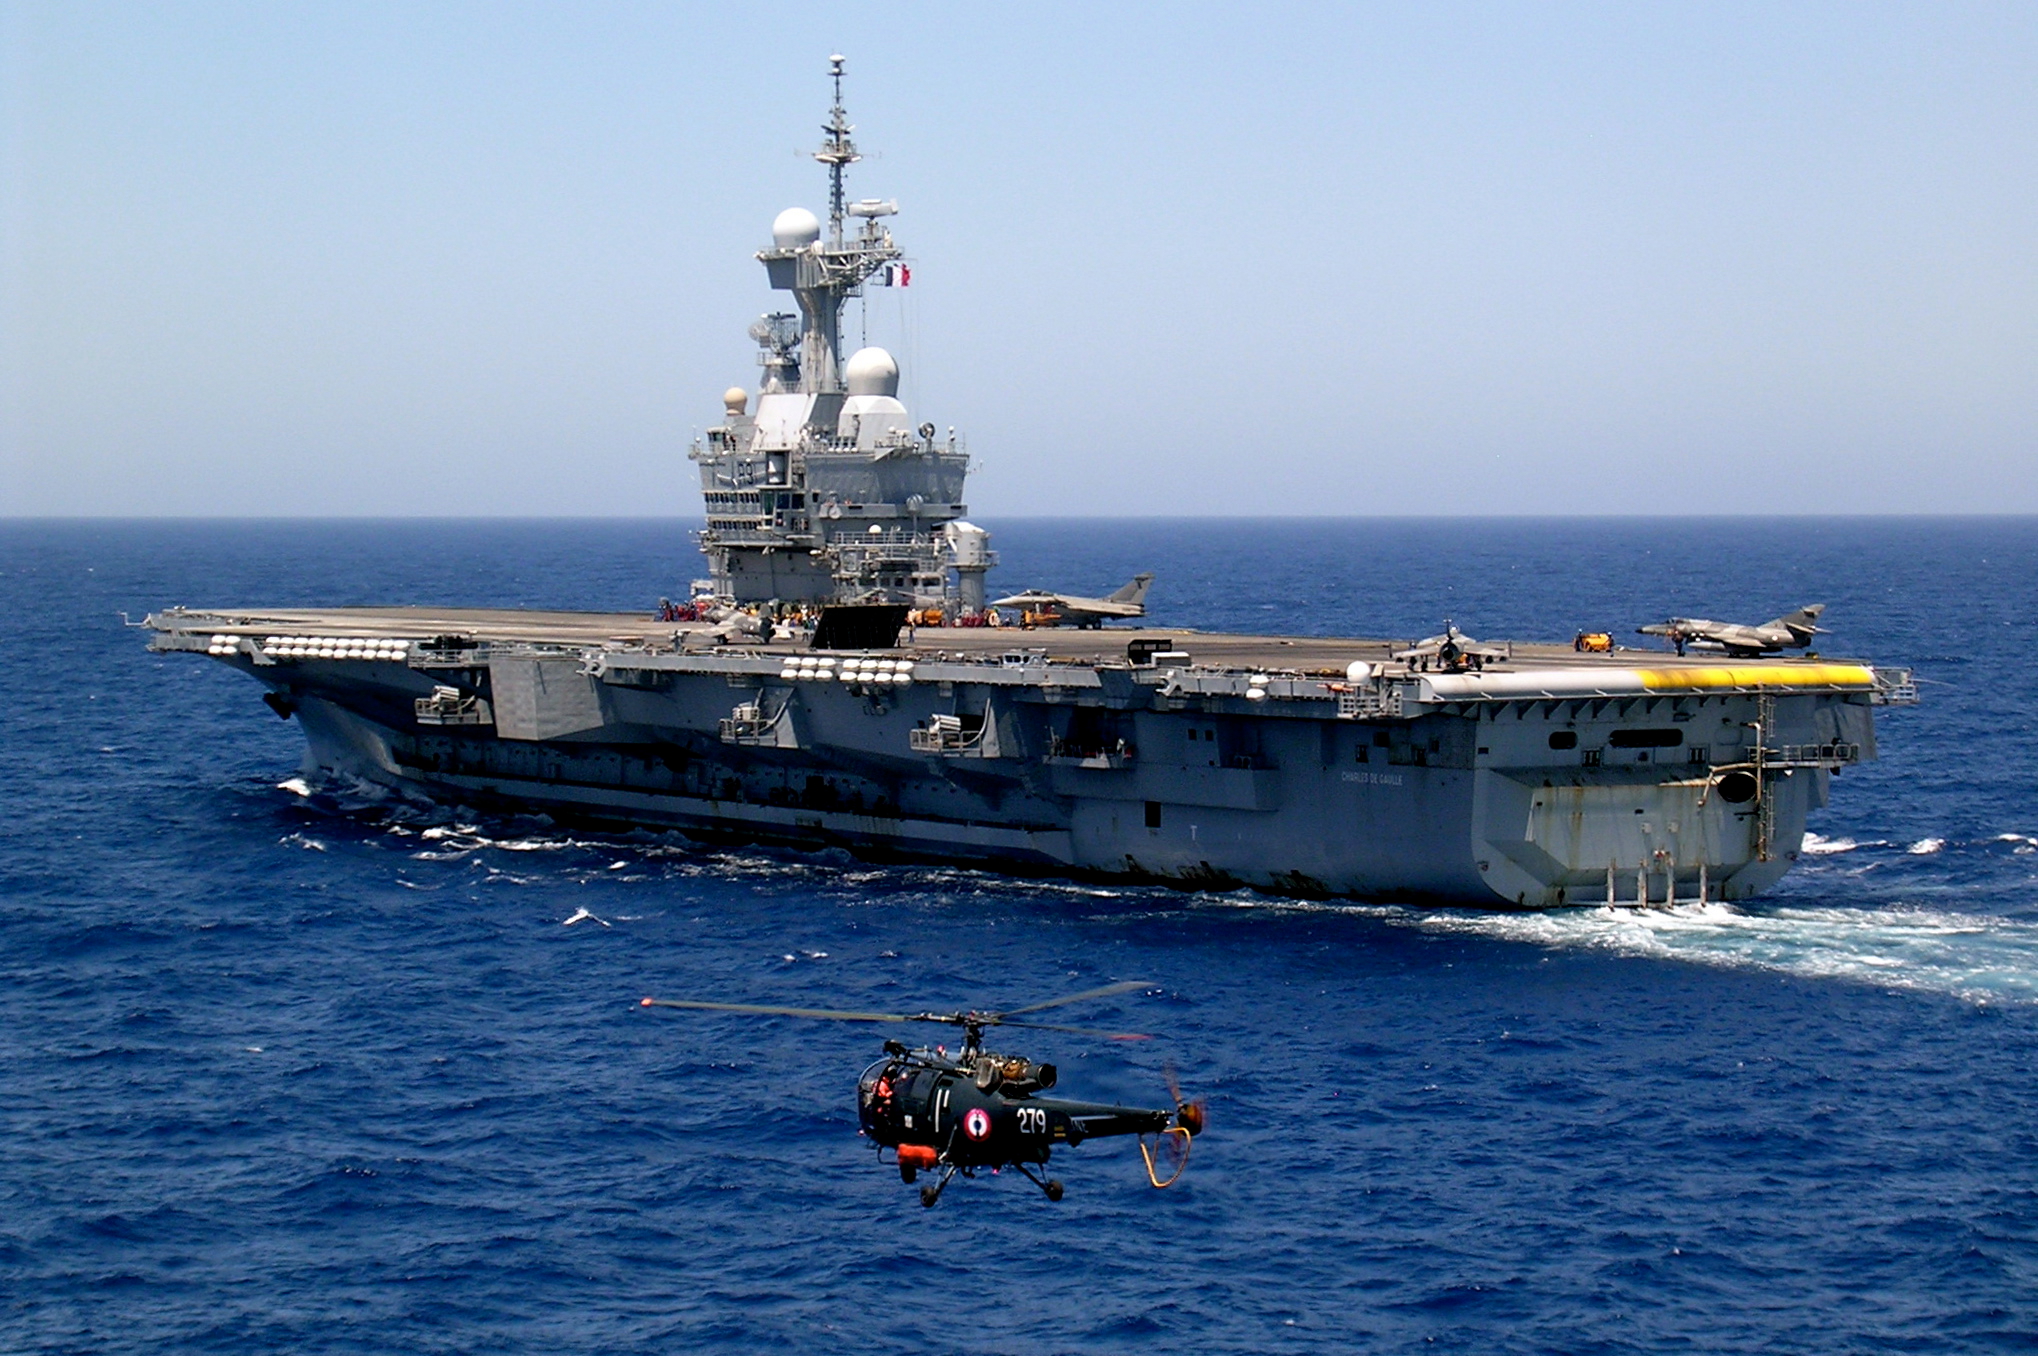 french aircraft carrier charles de gaulle (r91), military, aircraft carrier, warship, warships